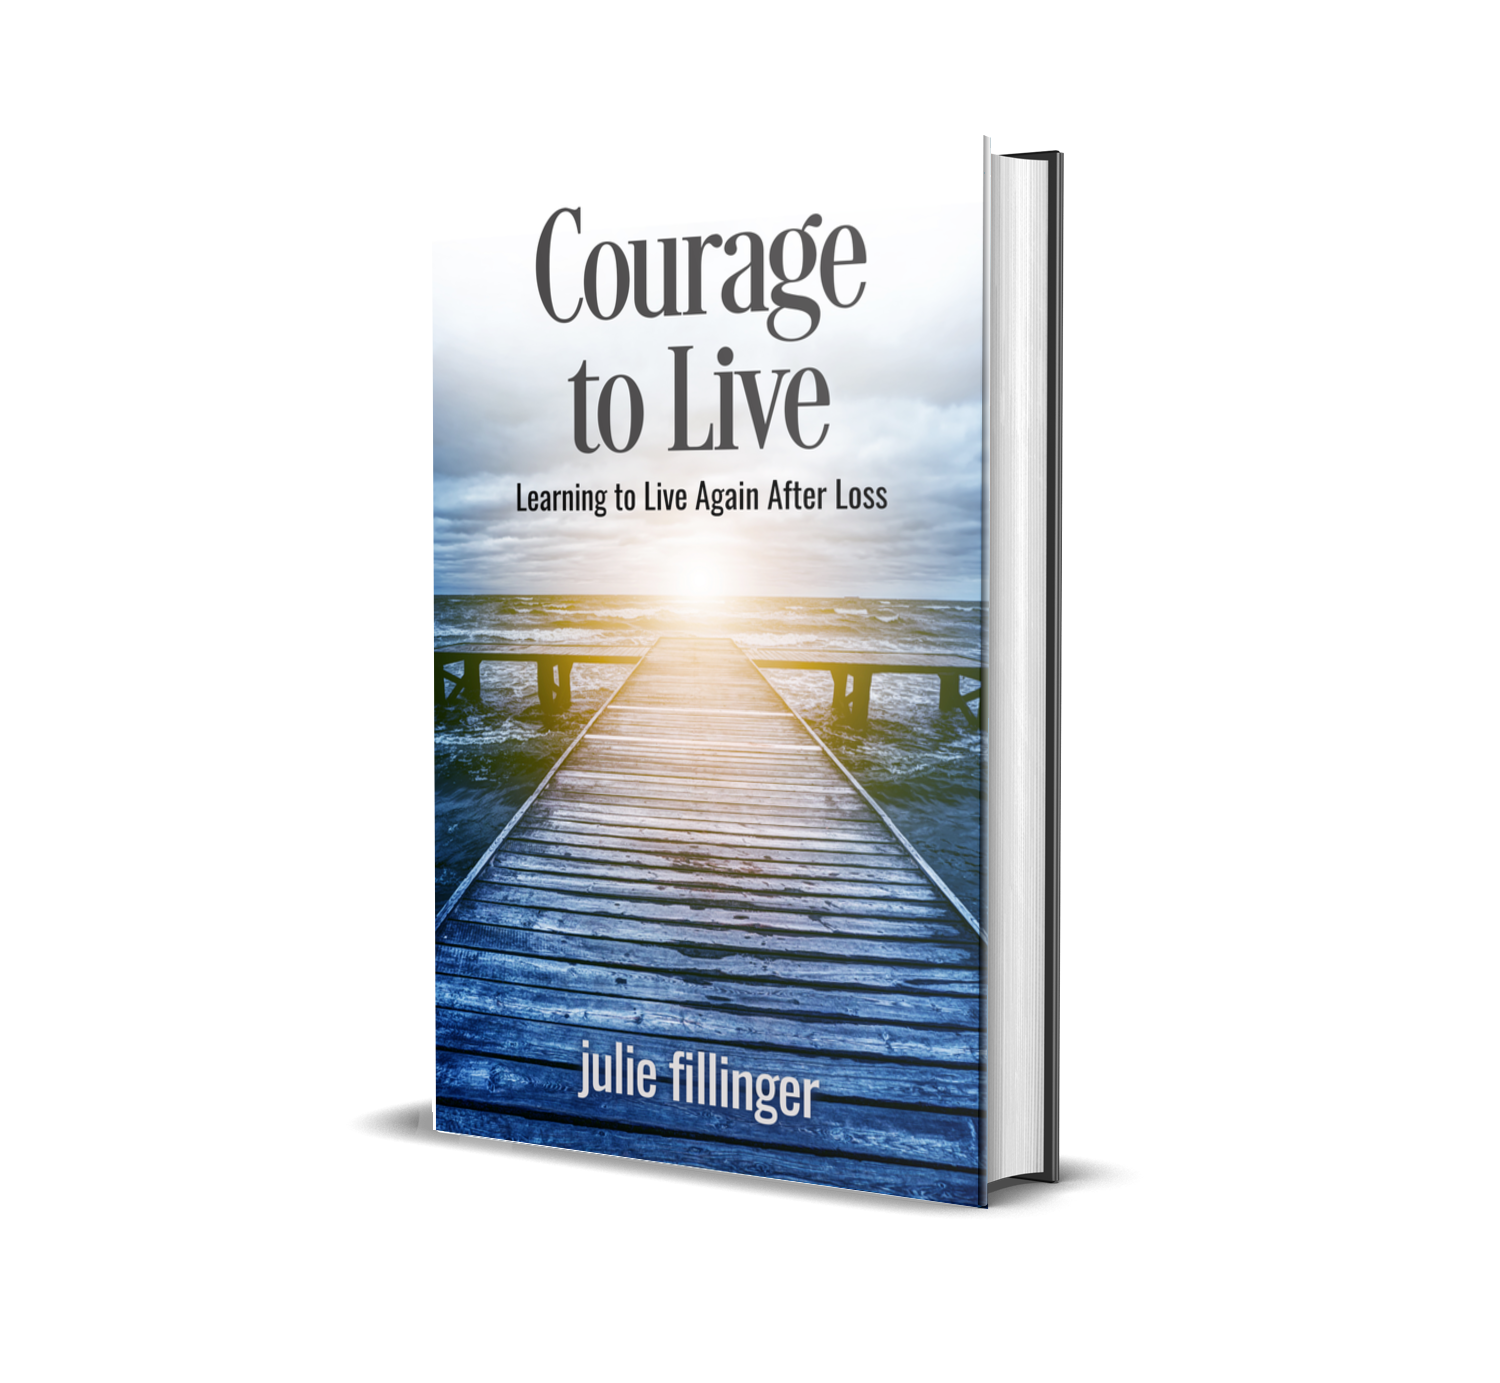 Courage to Live - Learning to Live Again After Loss, by Julia Fillinger